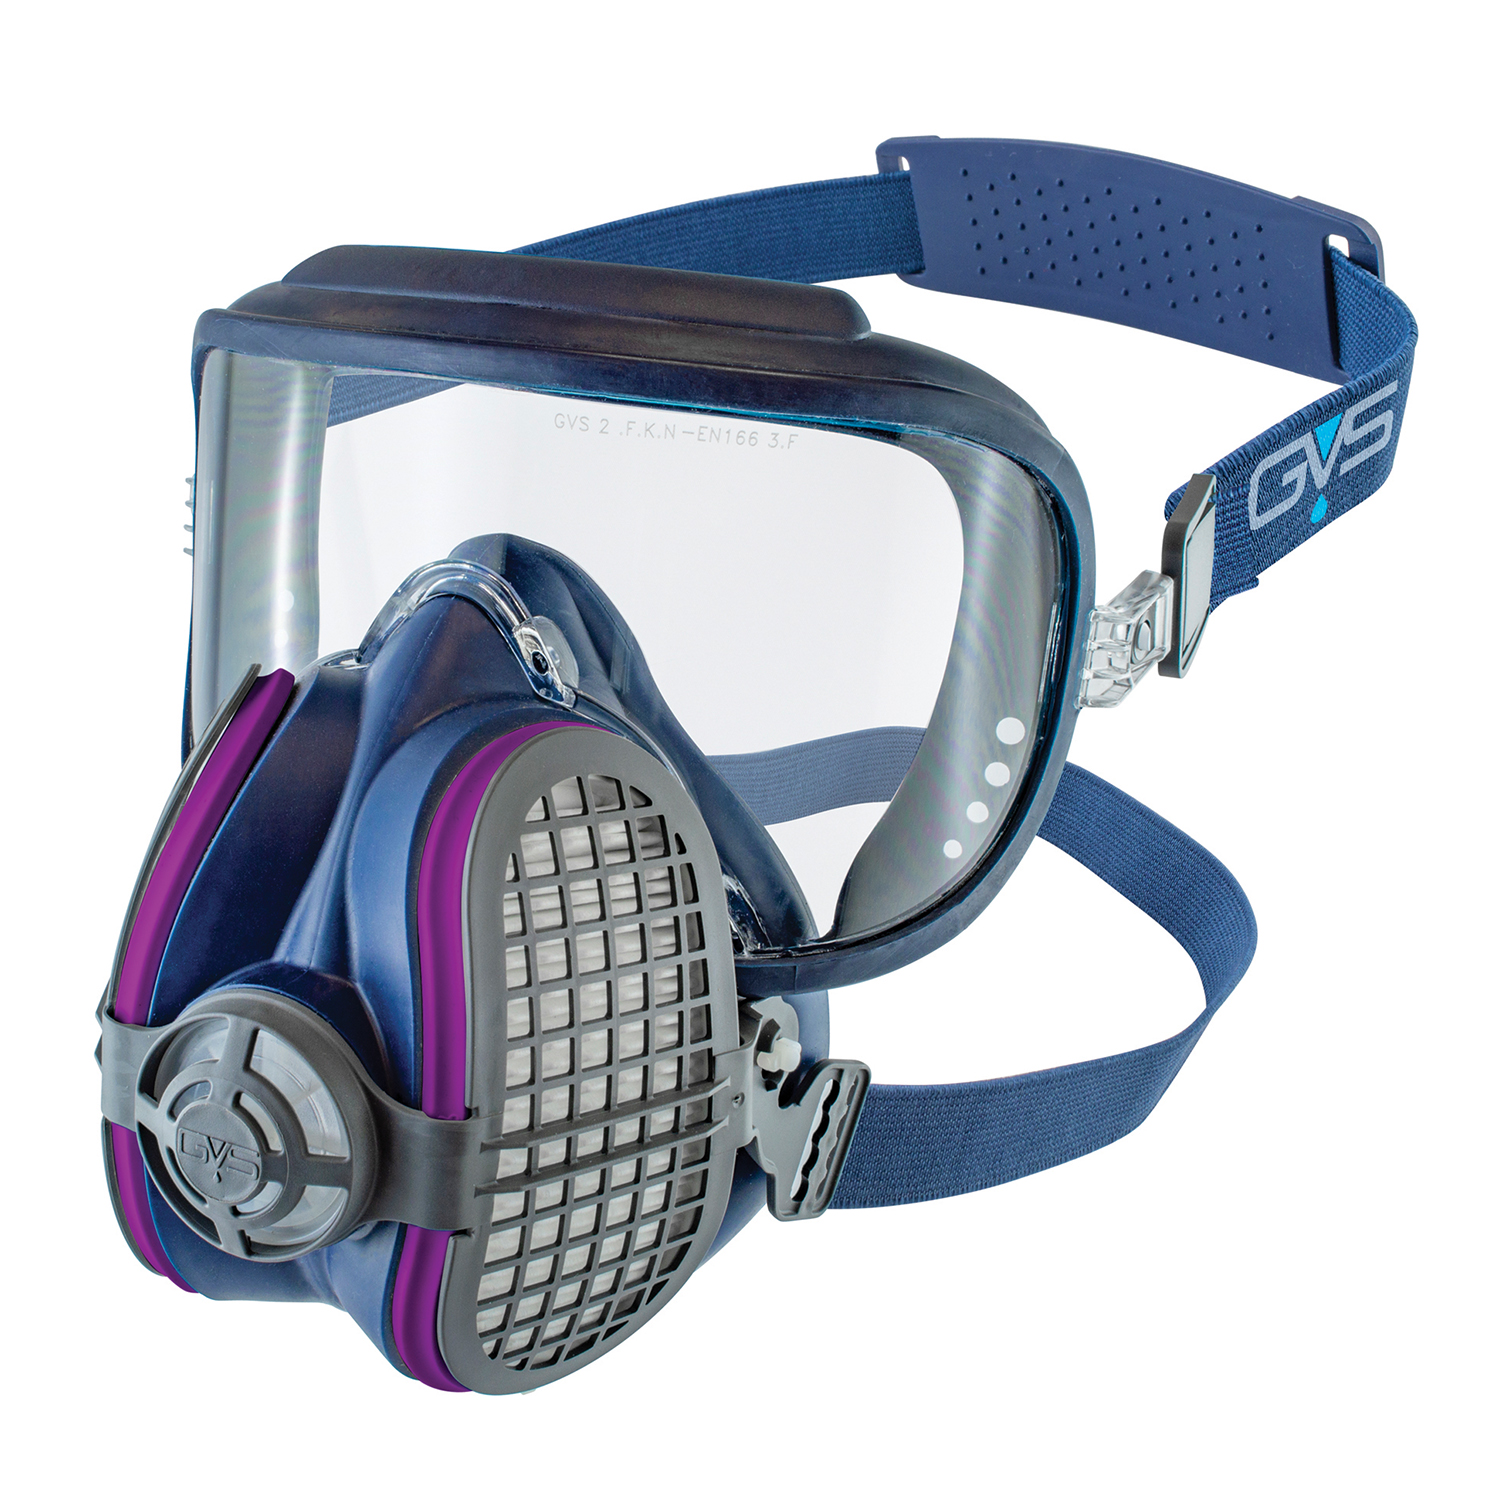 SPR550 Med/Lg Mask w/P100 filter and integrated goggles